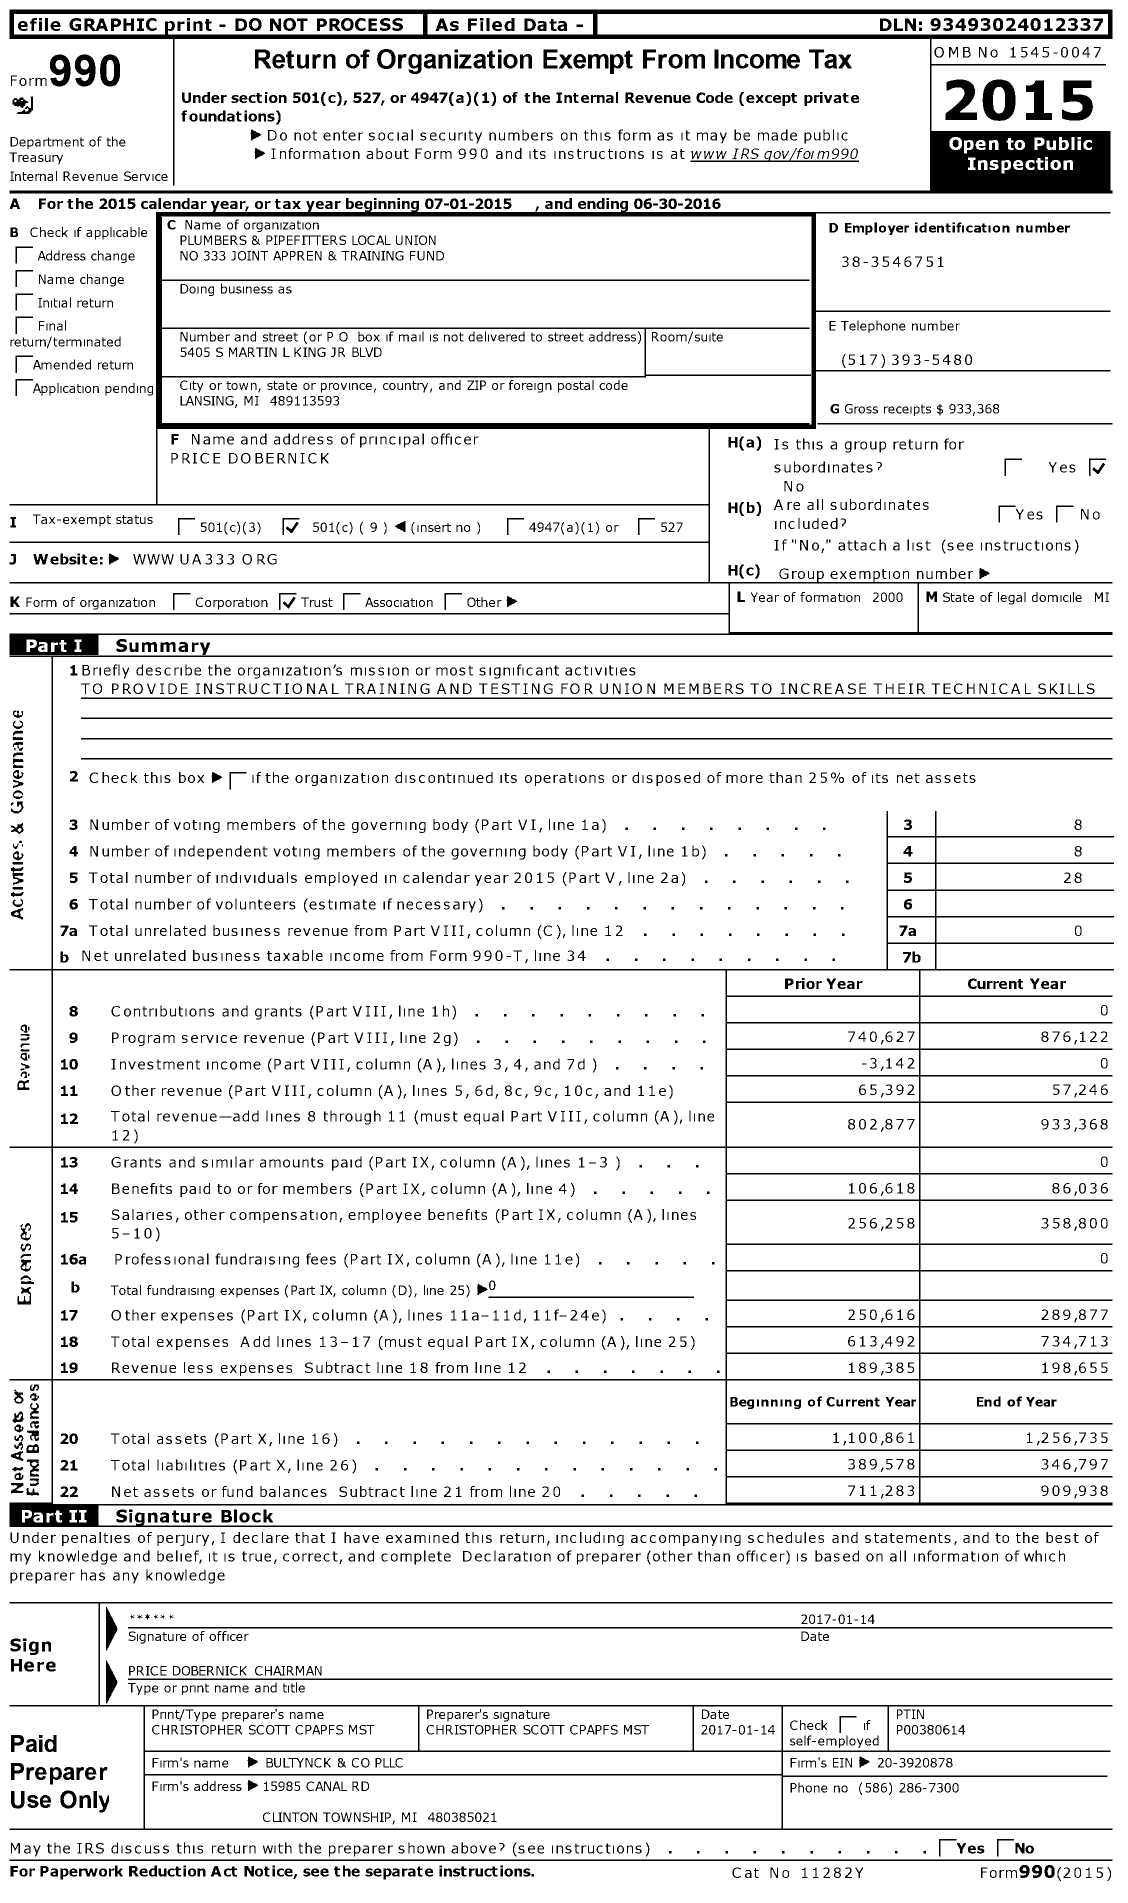 Image of first page of 2015 Form 990O for Plumbers and Pipefitters Local Union No 333 Joint Appren and Training Fund